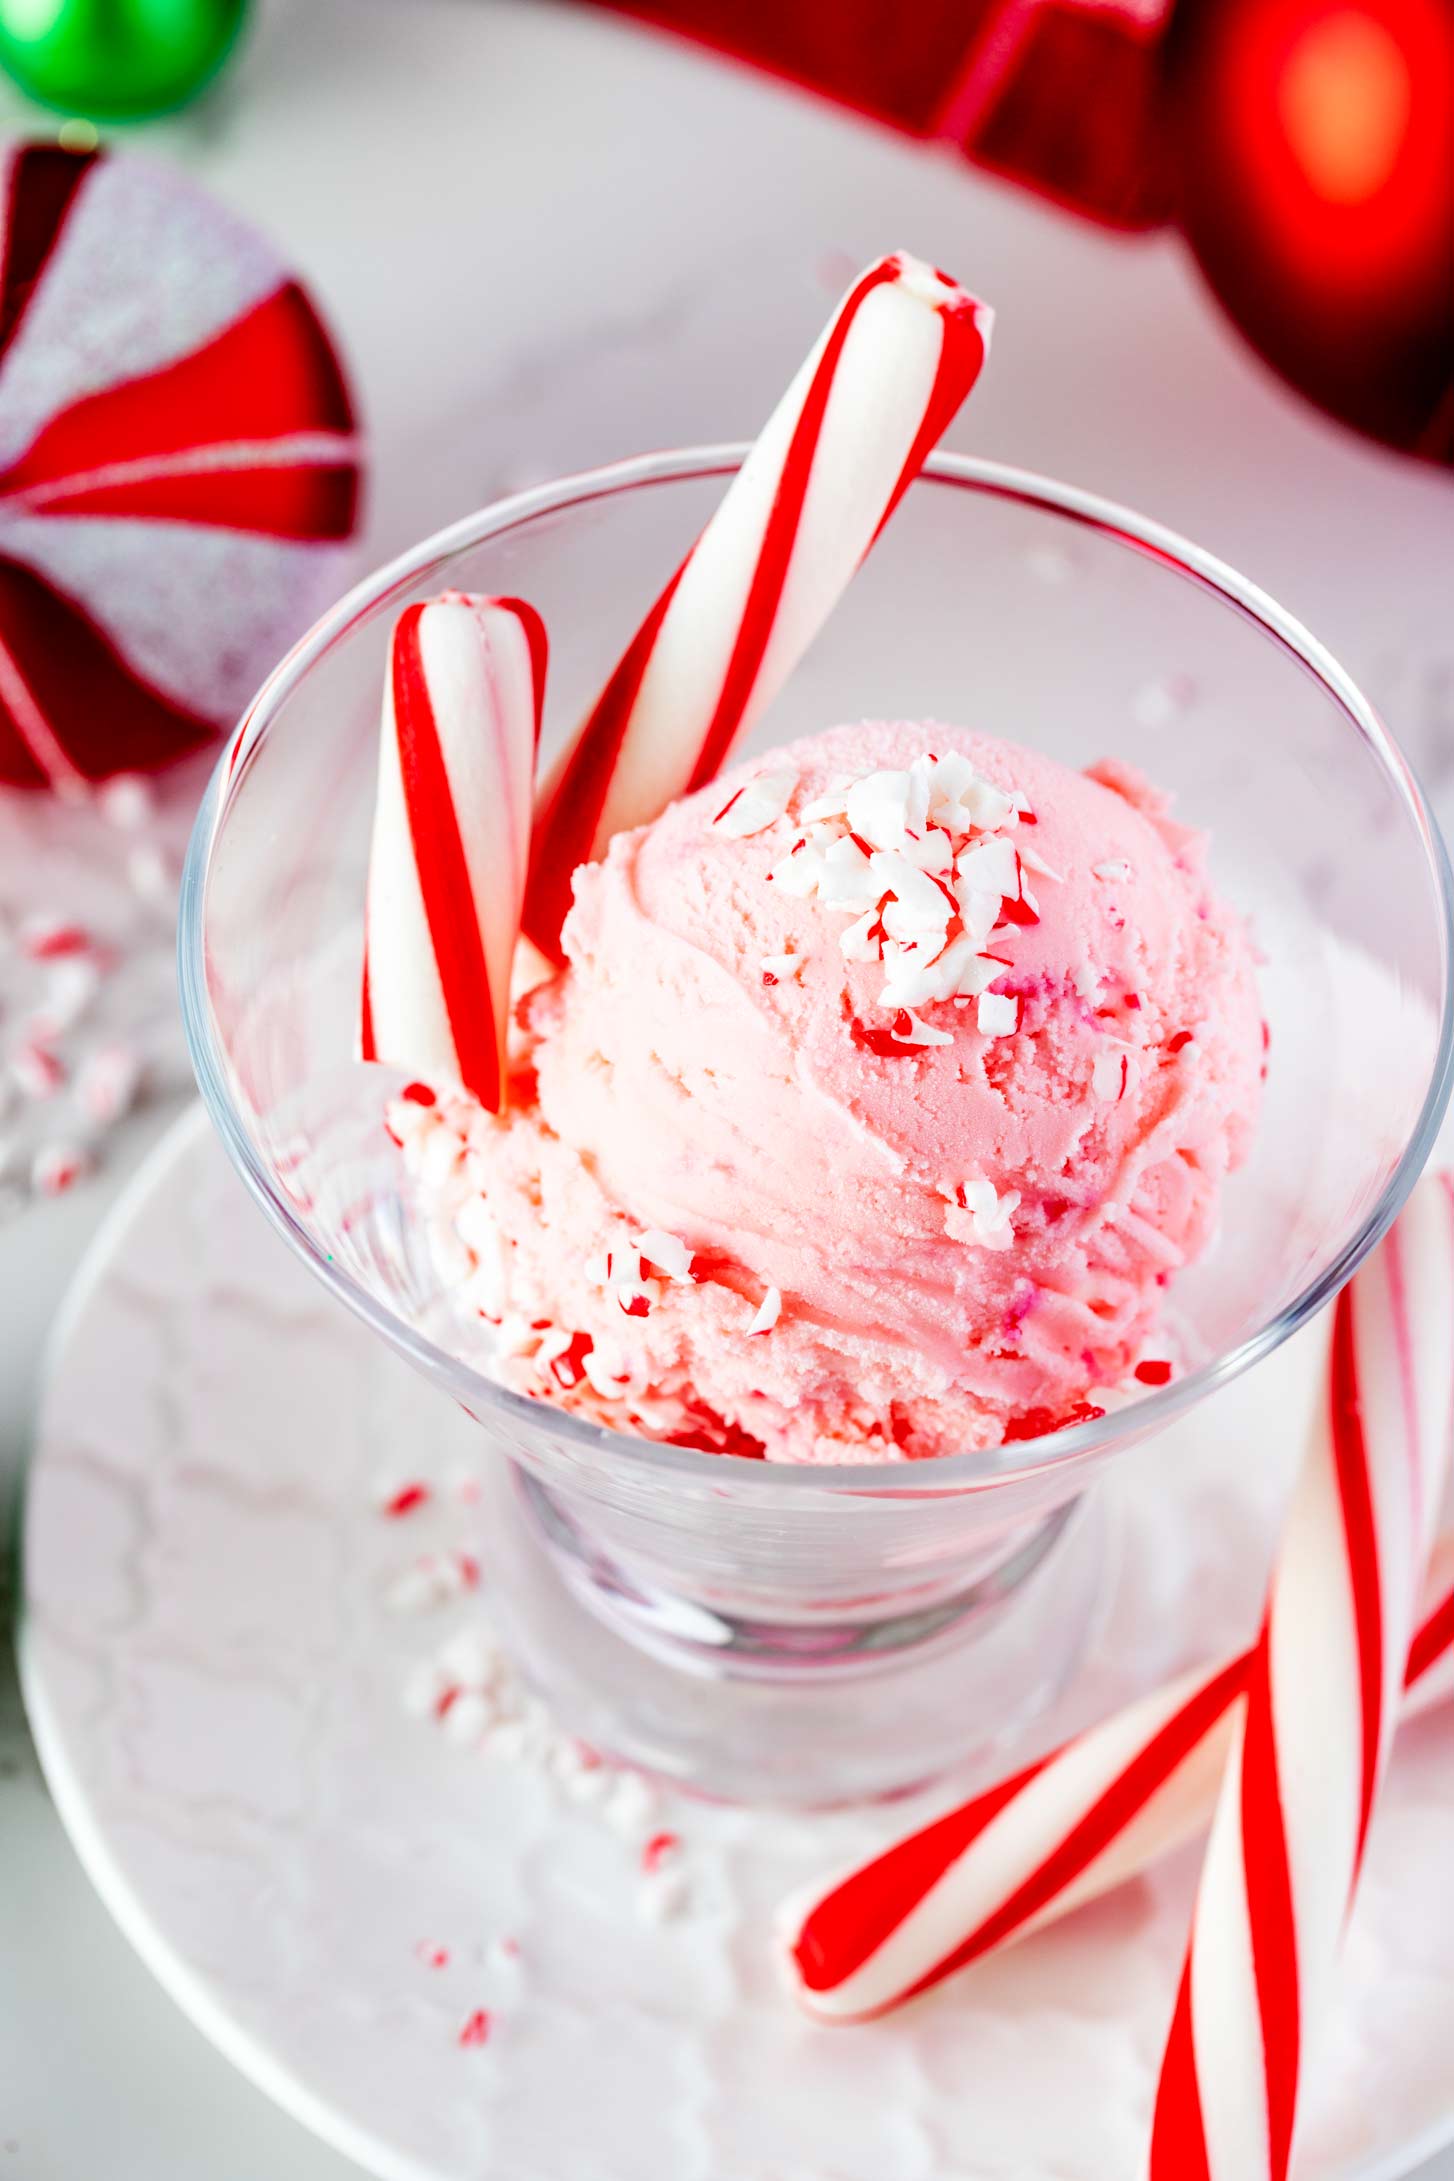 Photo of peppermint ice cream in a small glass ice cream dish sitting on a small white plate garnished with peppermint.